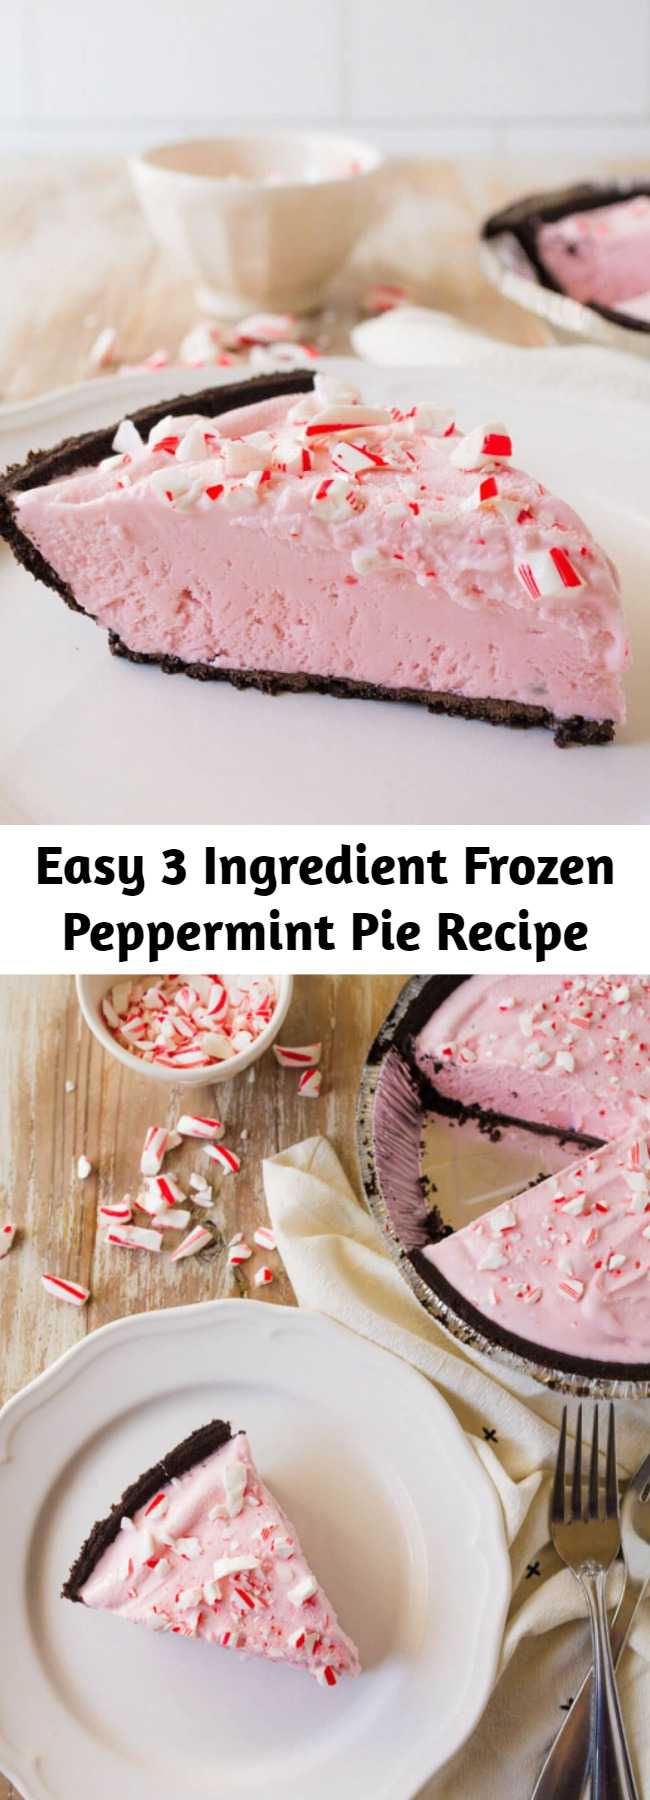 Easy 3 Ingredient Frozen Peppermint Pie Recipe - Make this Frozen Peppermint Pie using only 3 things.  It’s the easiest recipe and so wonderful for the holidays!